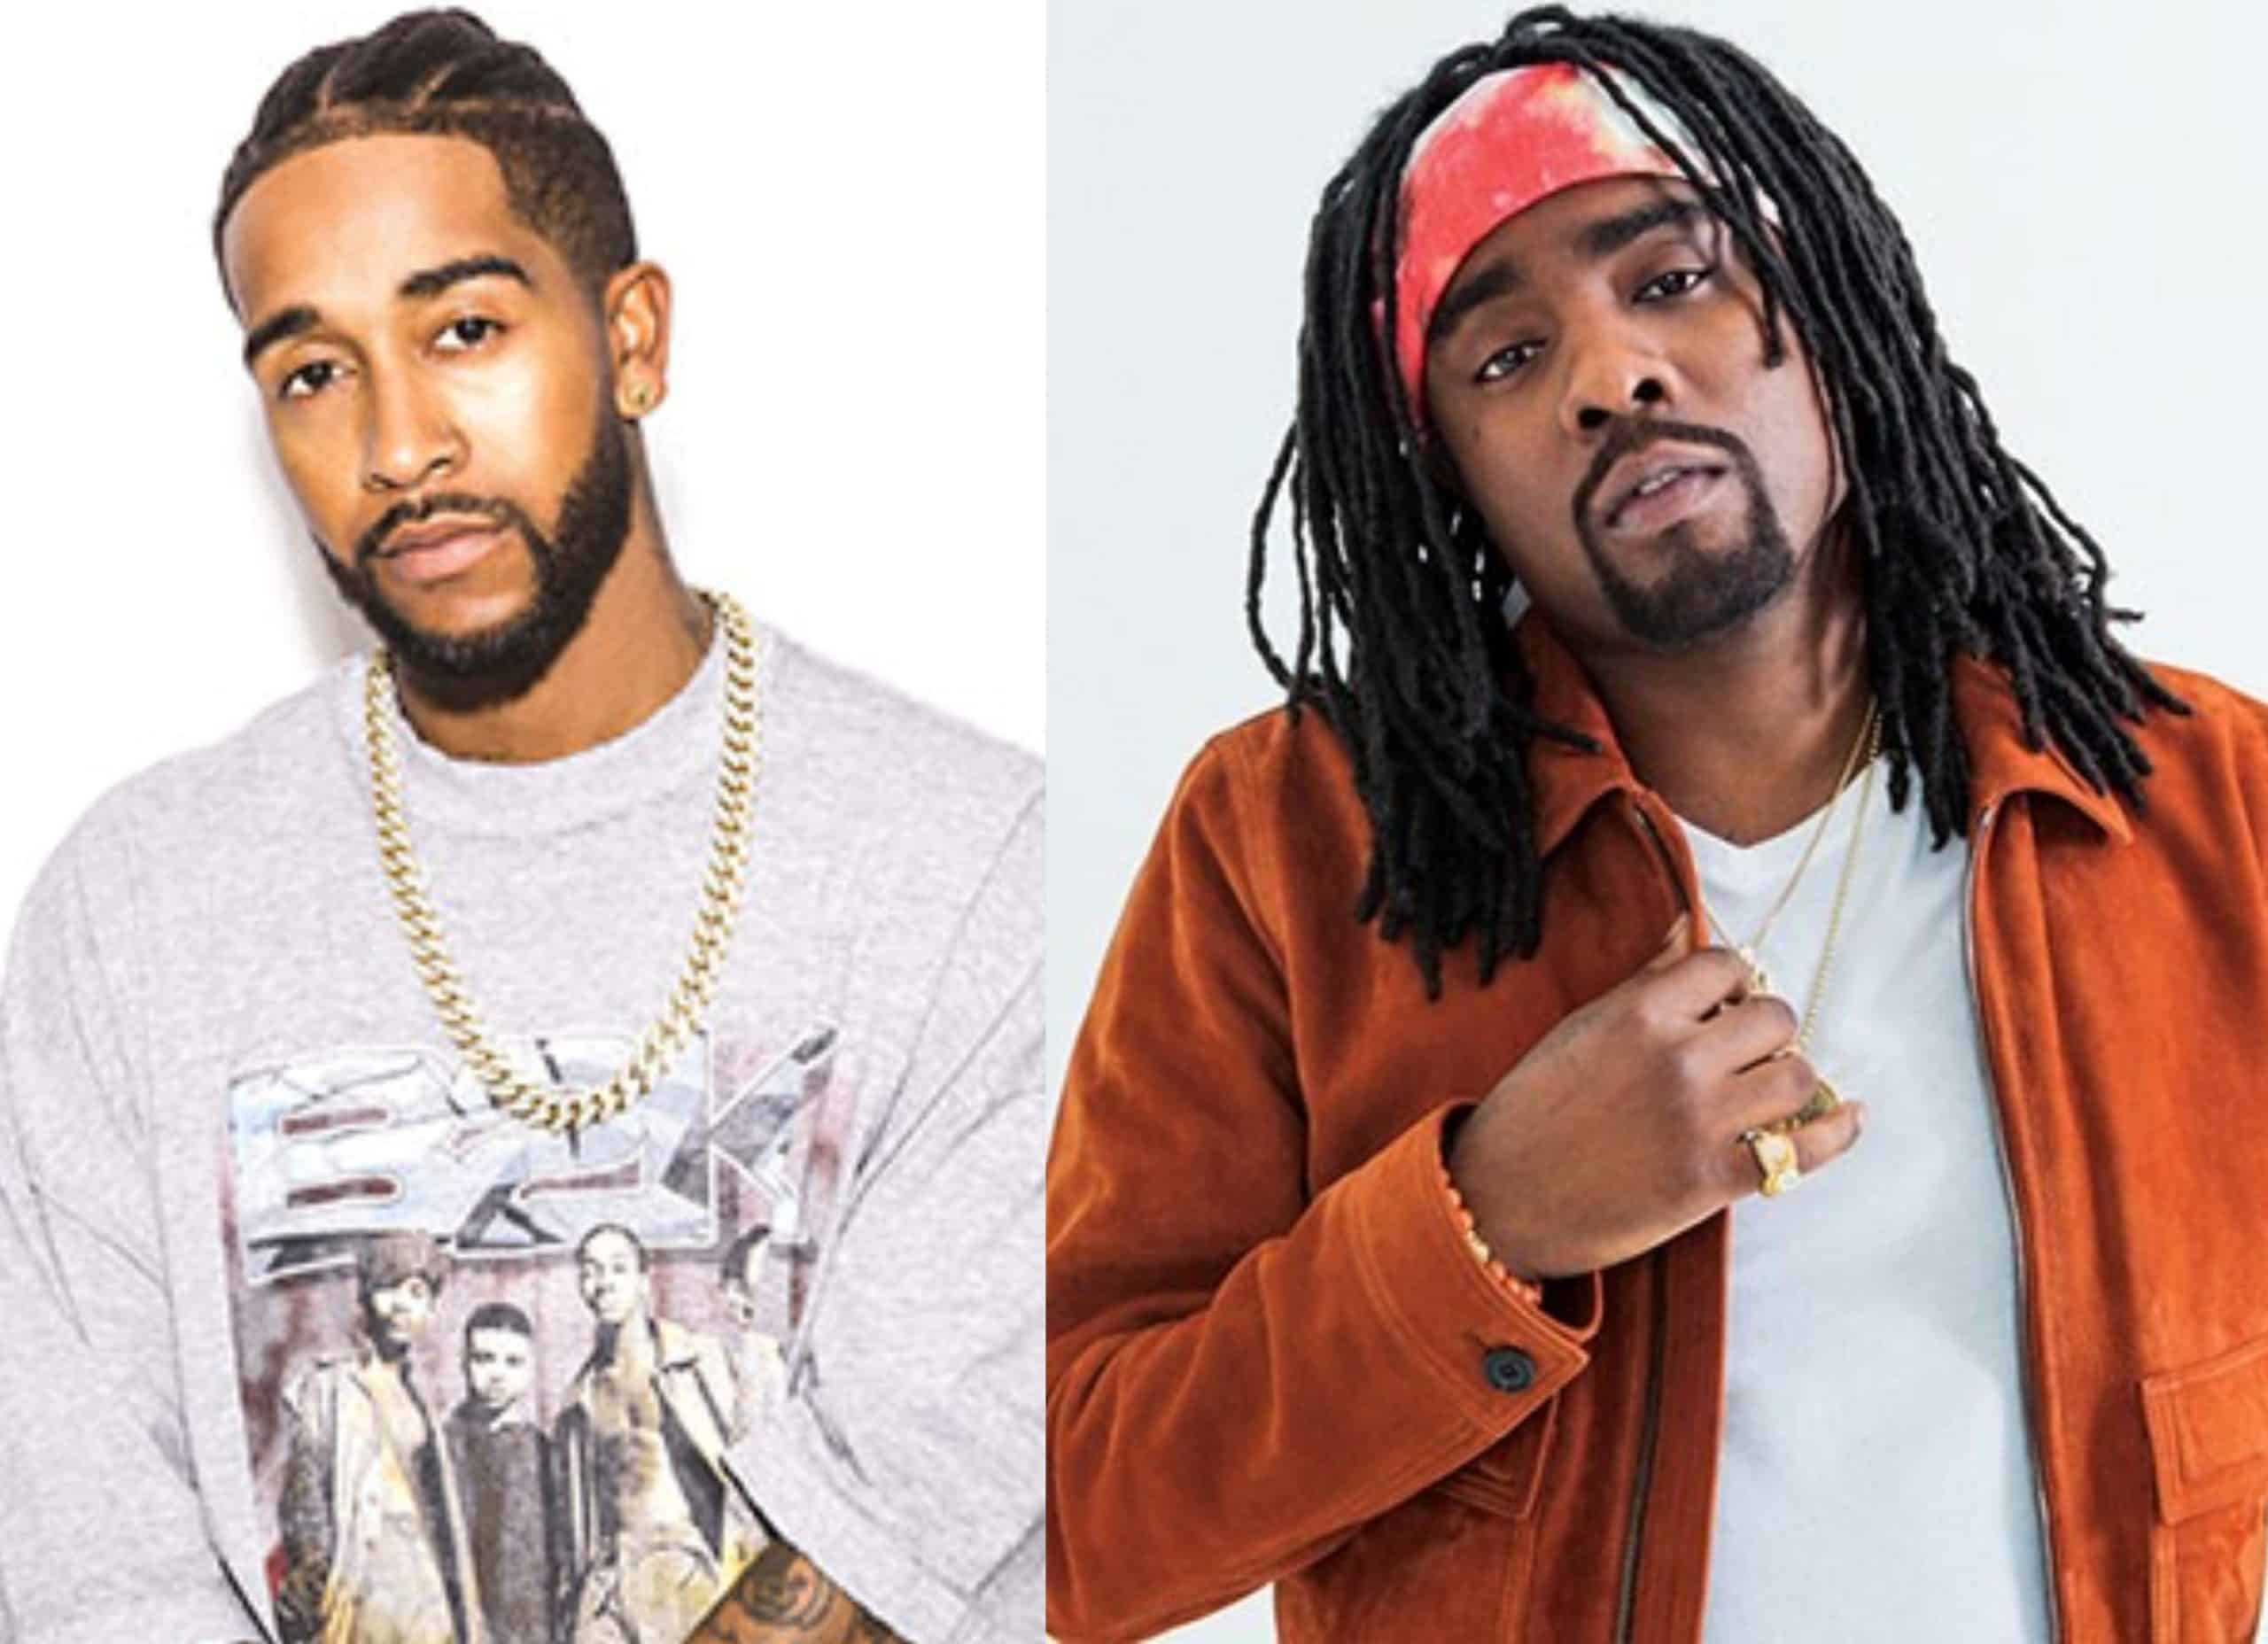 New Music Omarion - Mutual (Feat. Wale)